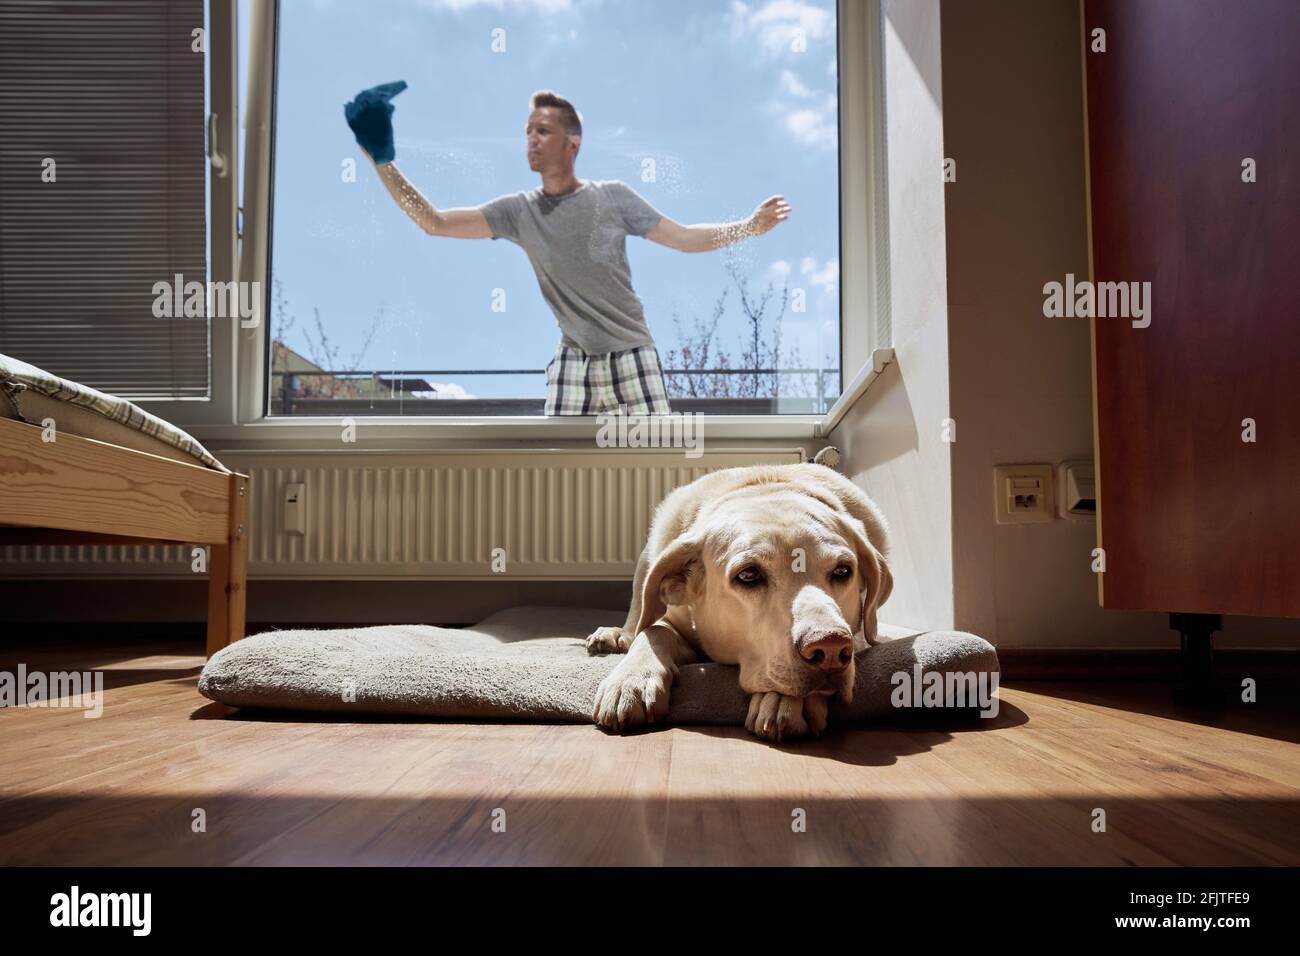 Old dog resting on pet bed and man cleaning window with rag at home. Themes housework and housekeeping and living with pets. Stock Photo